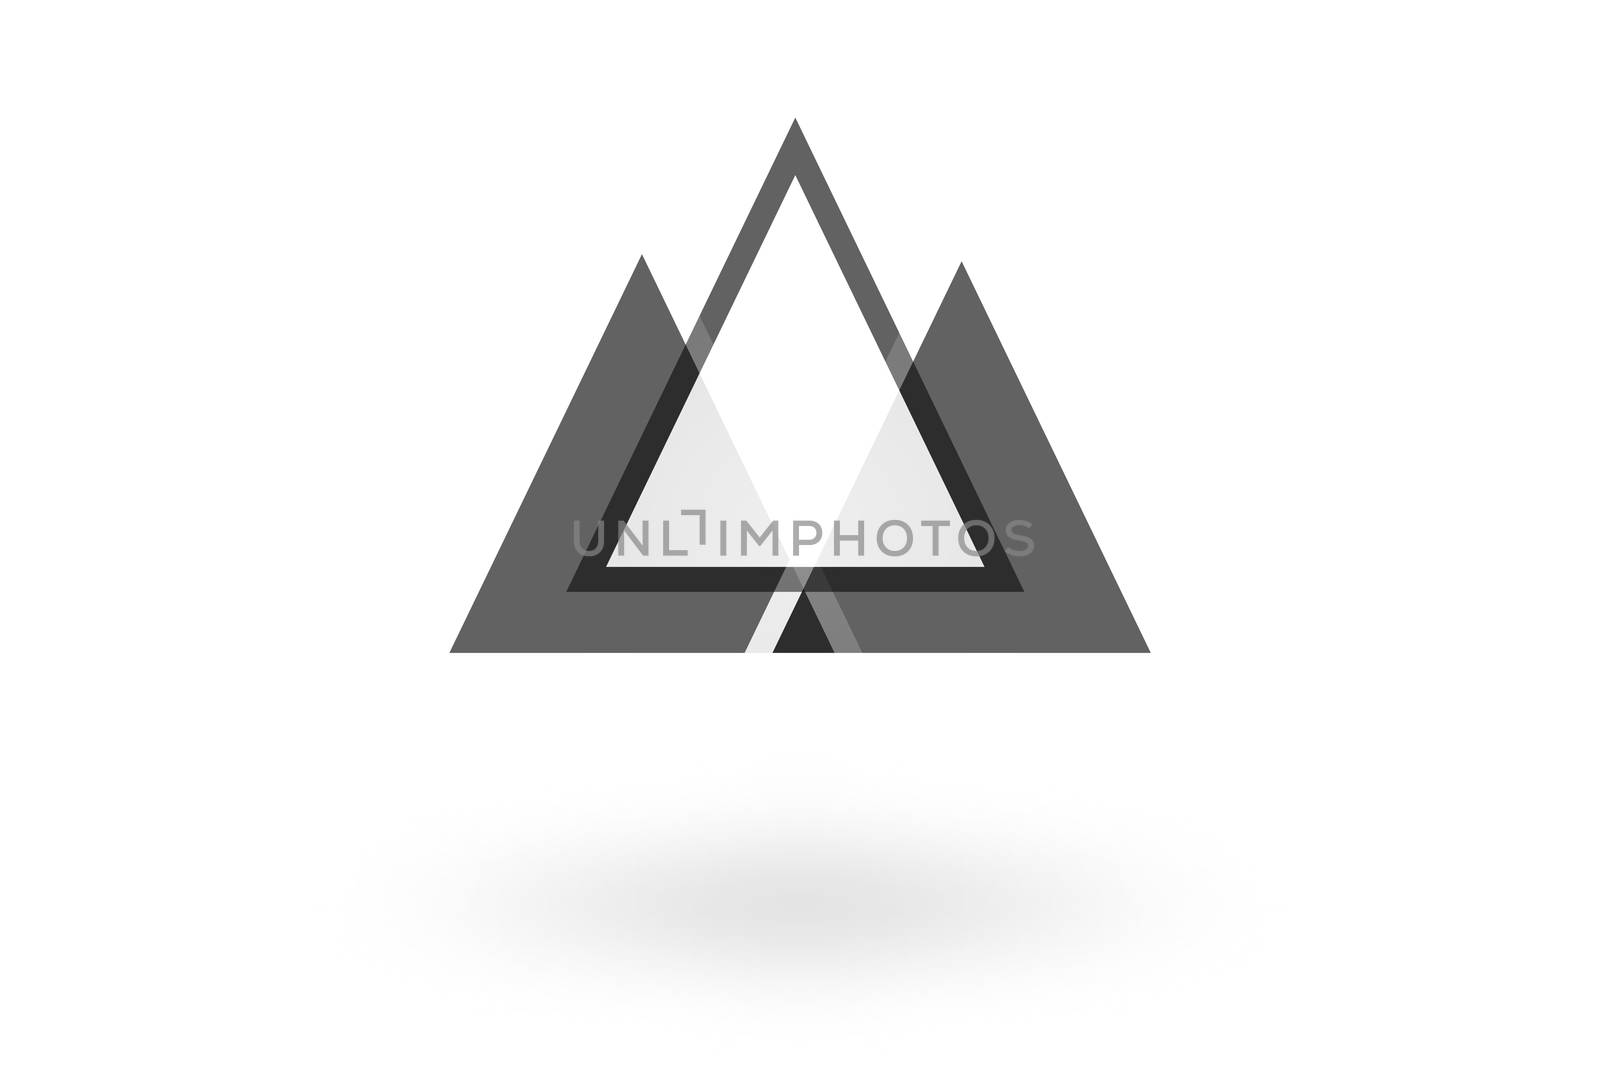 Abstract geometric pattern, monochrome triangle overlapping logo on white background